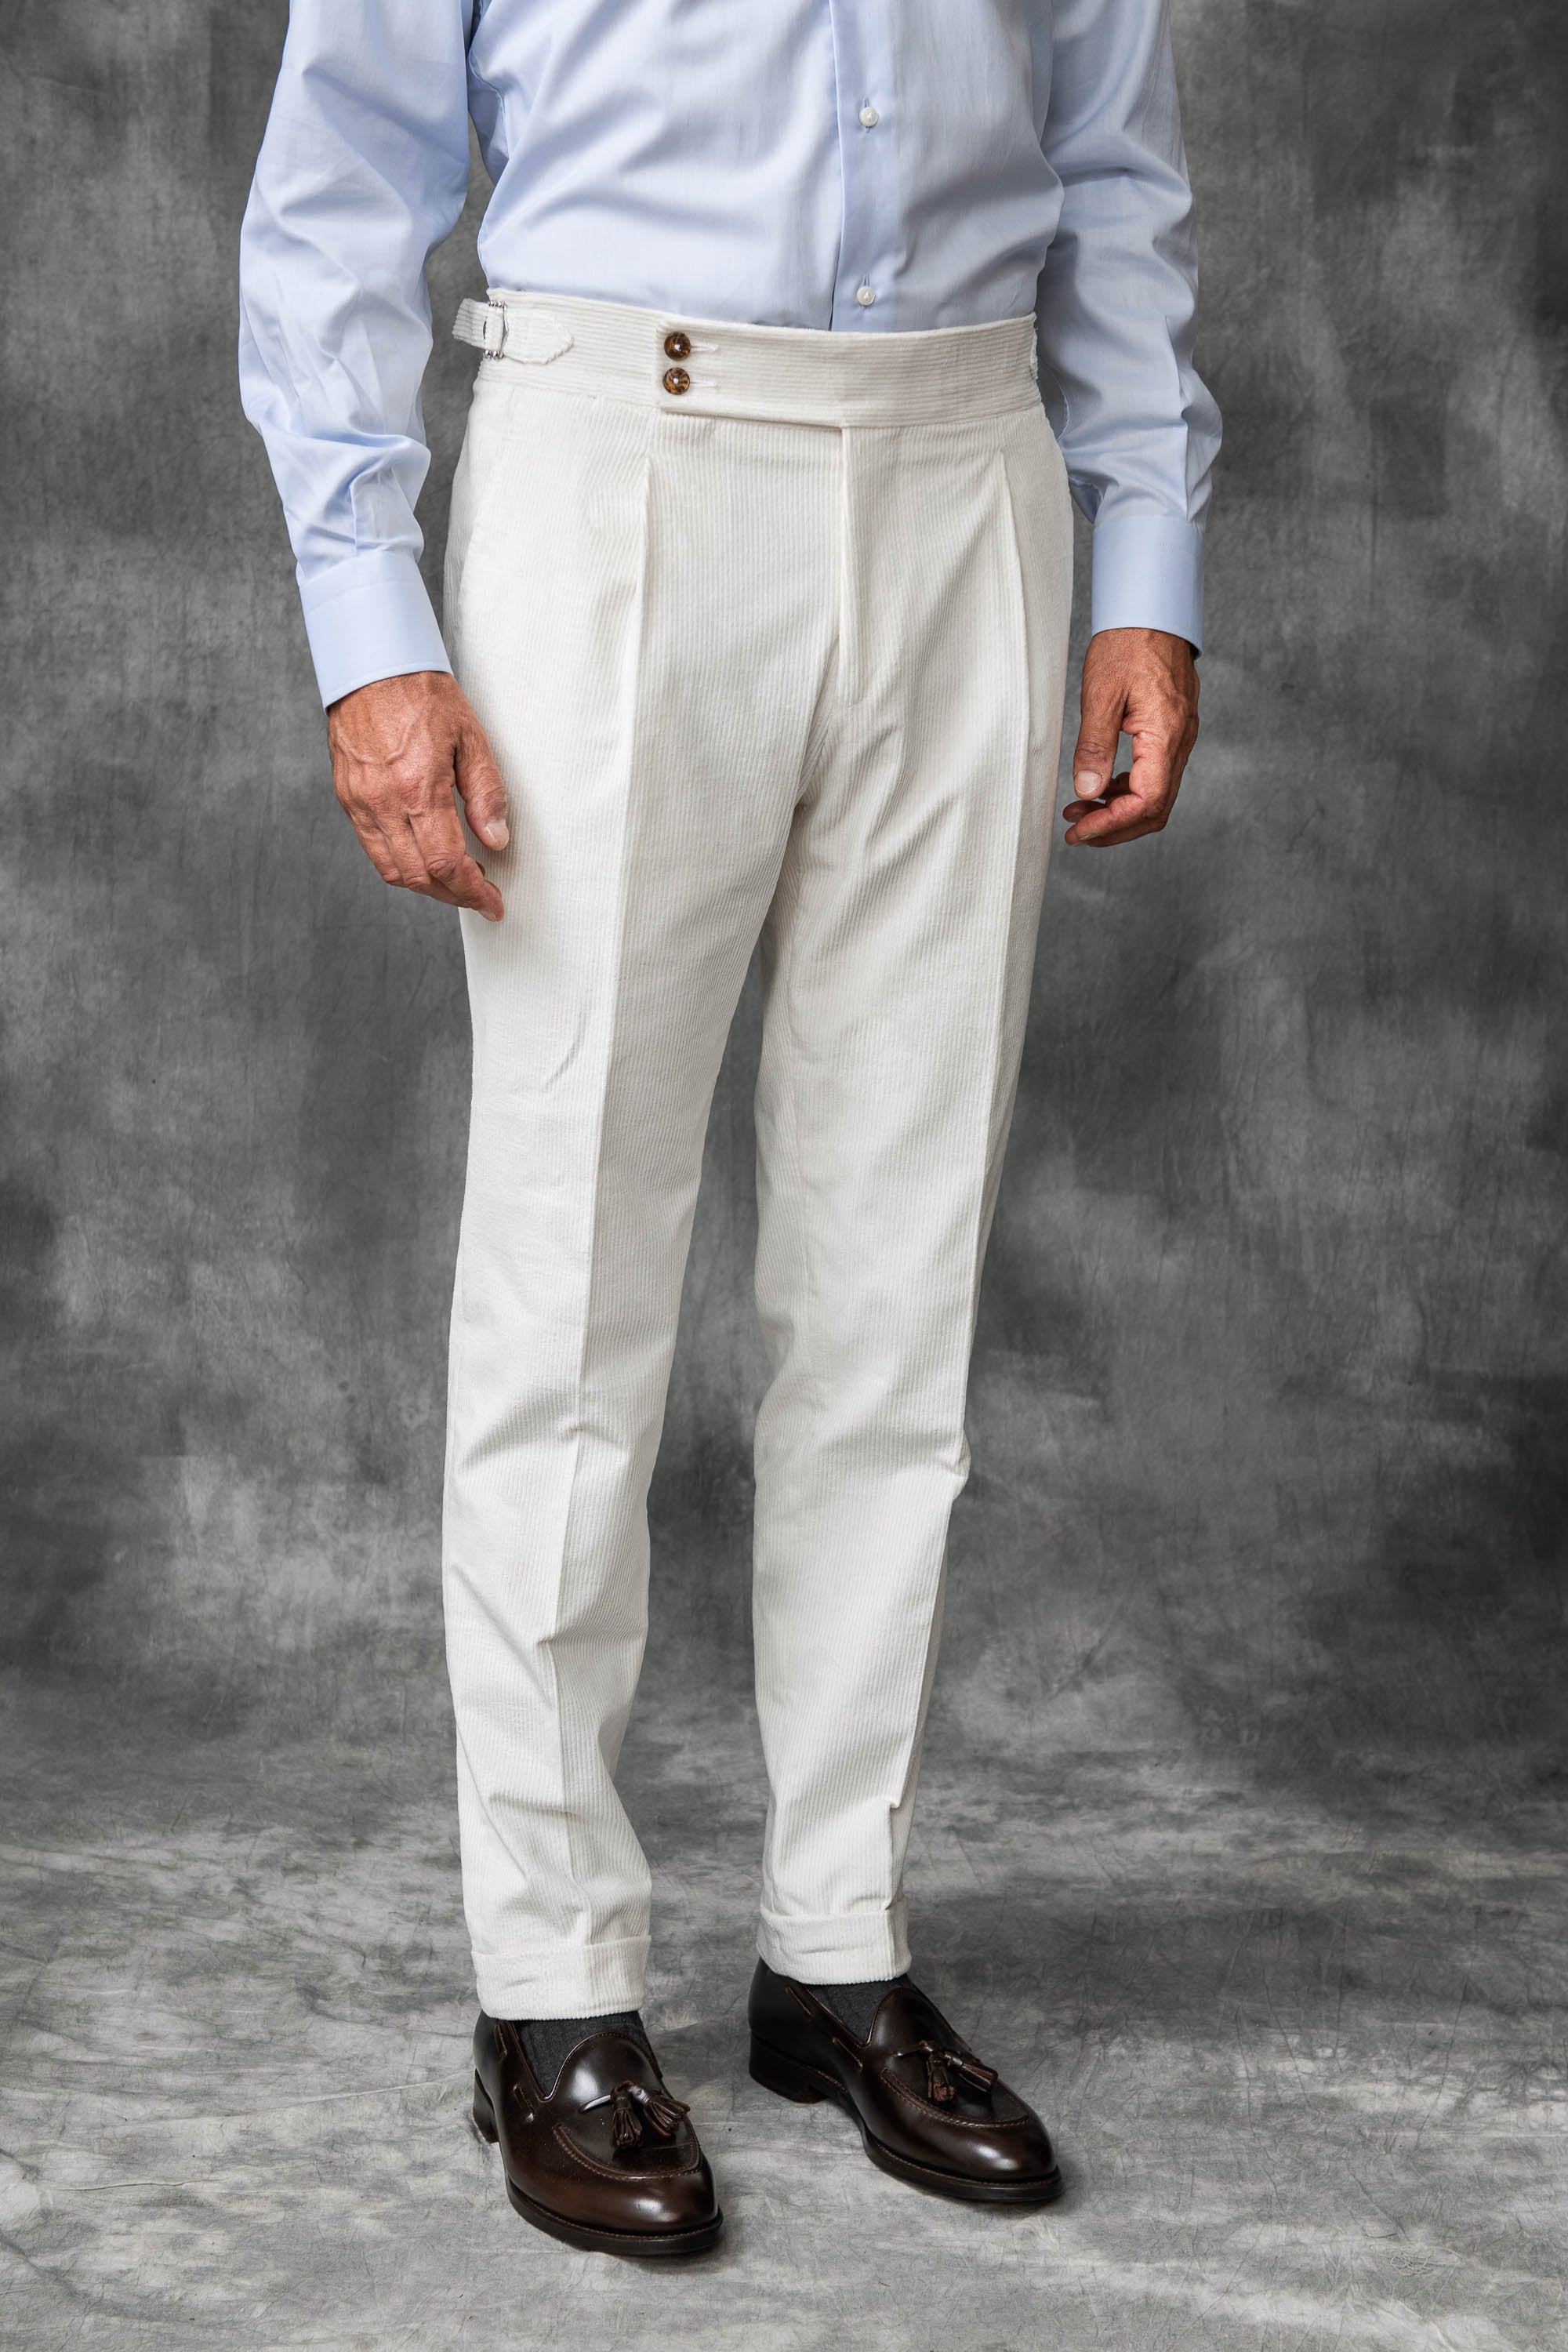 Pantaloni bianchi in velluto a coste " Soragna Capsule Collection" - Made in Italy